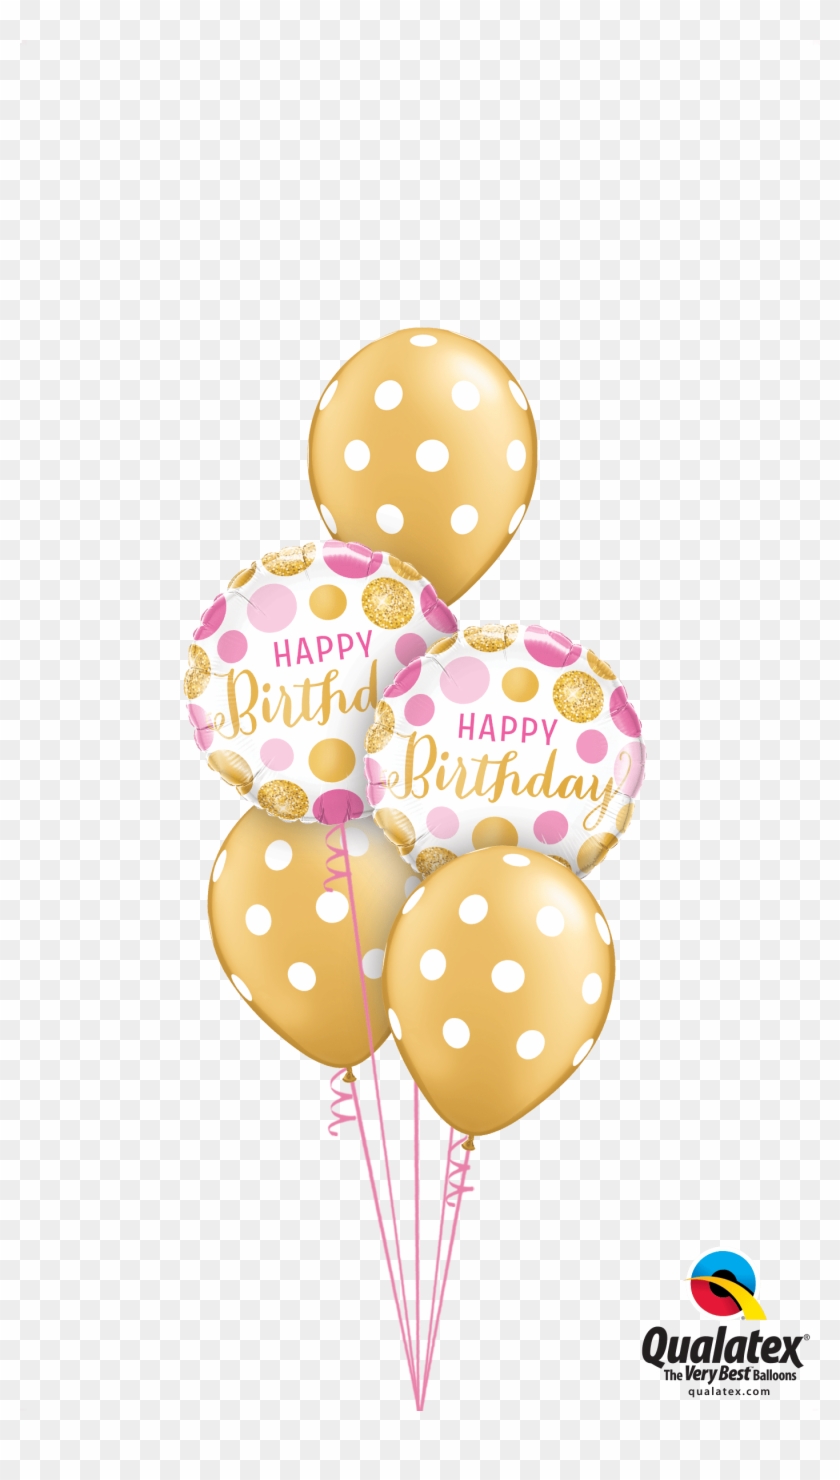 Get Gold & Pink Polka Dots Helium Balloons Delivered - Qualatex Fathers Day Balloons Clipart #5124647